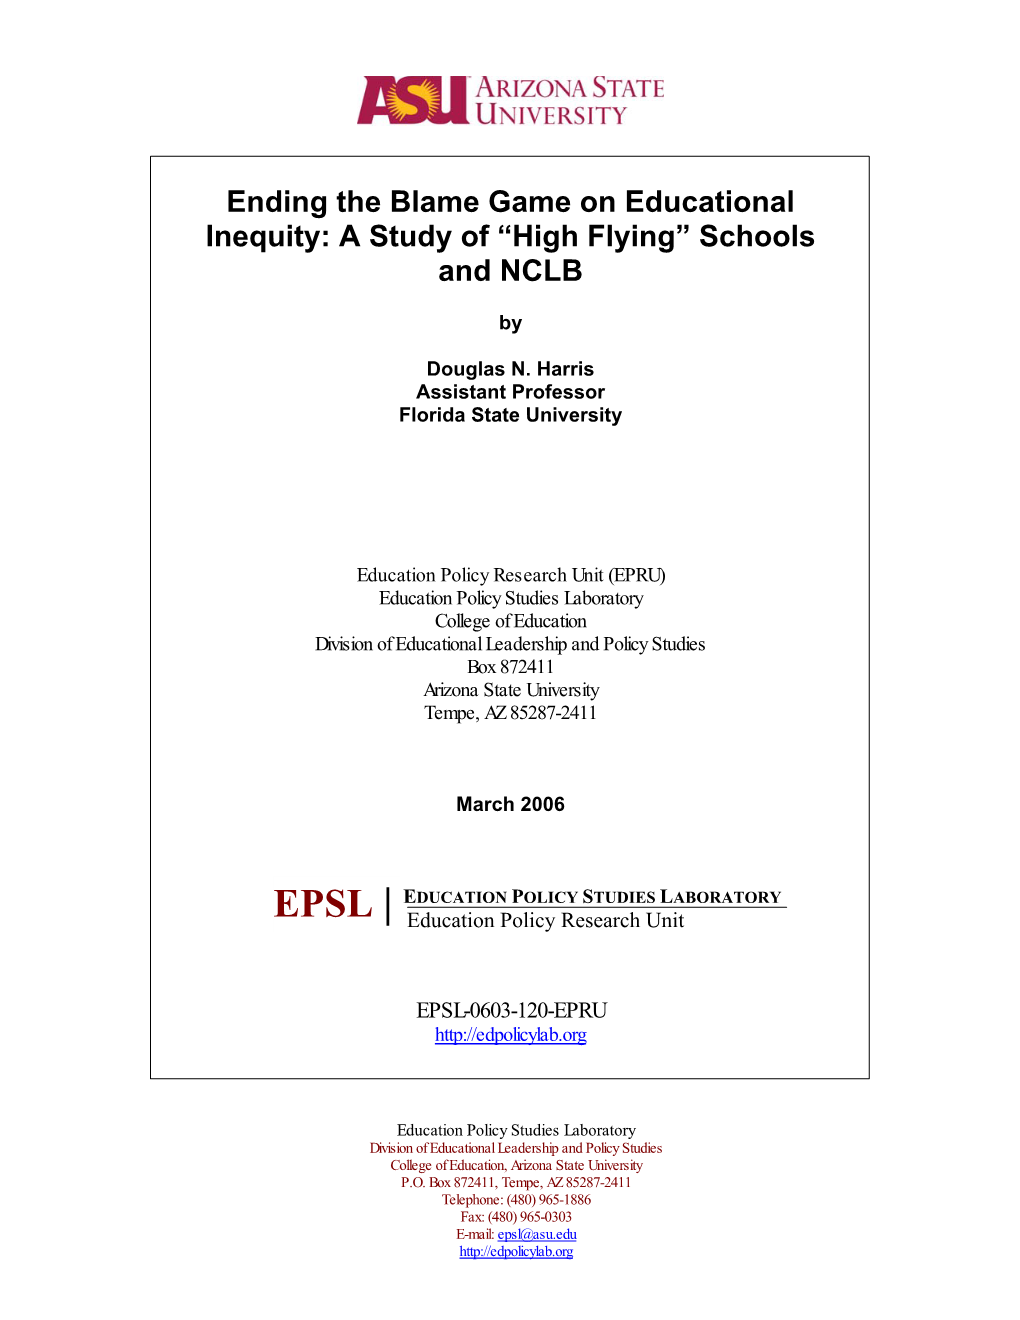 Ending the Blame Game on Educational Inequity: a Study of “High Flying” Schools and NCLB